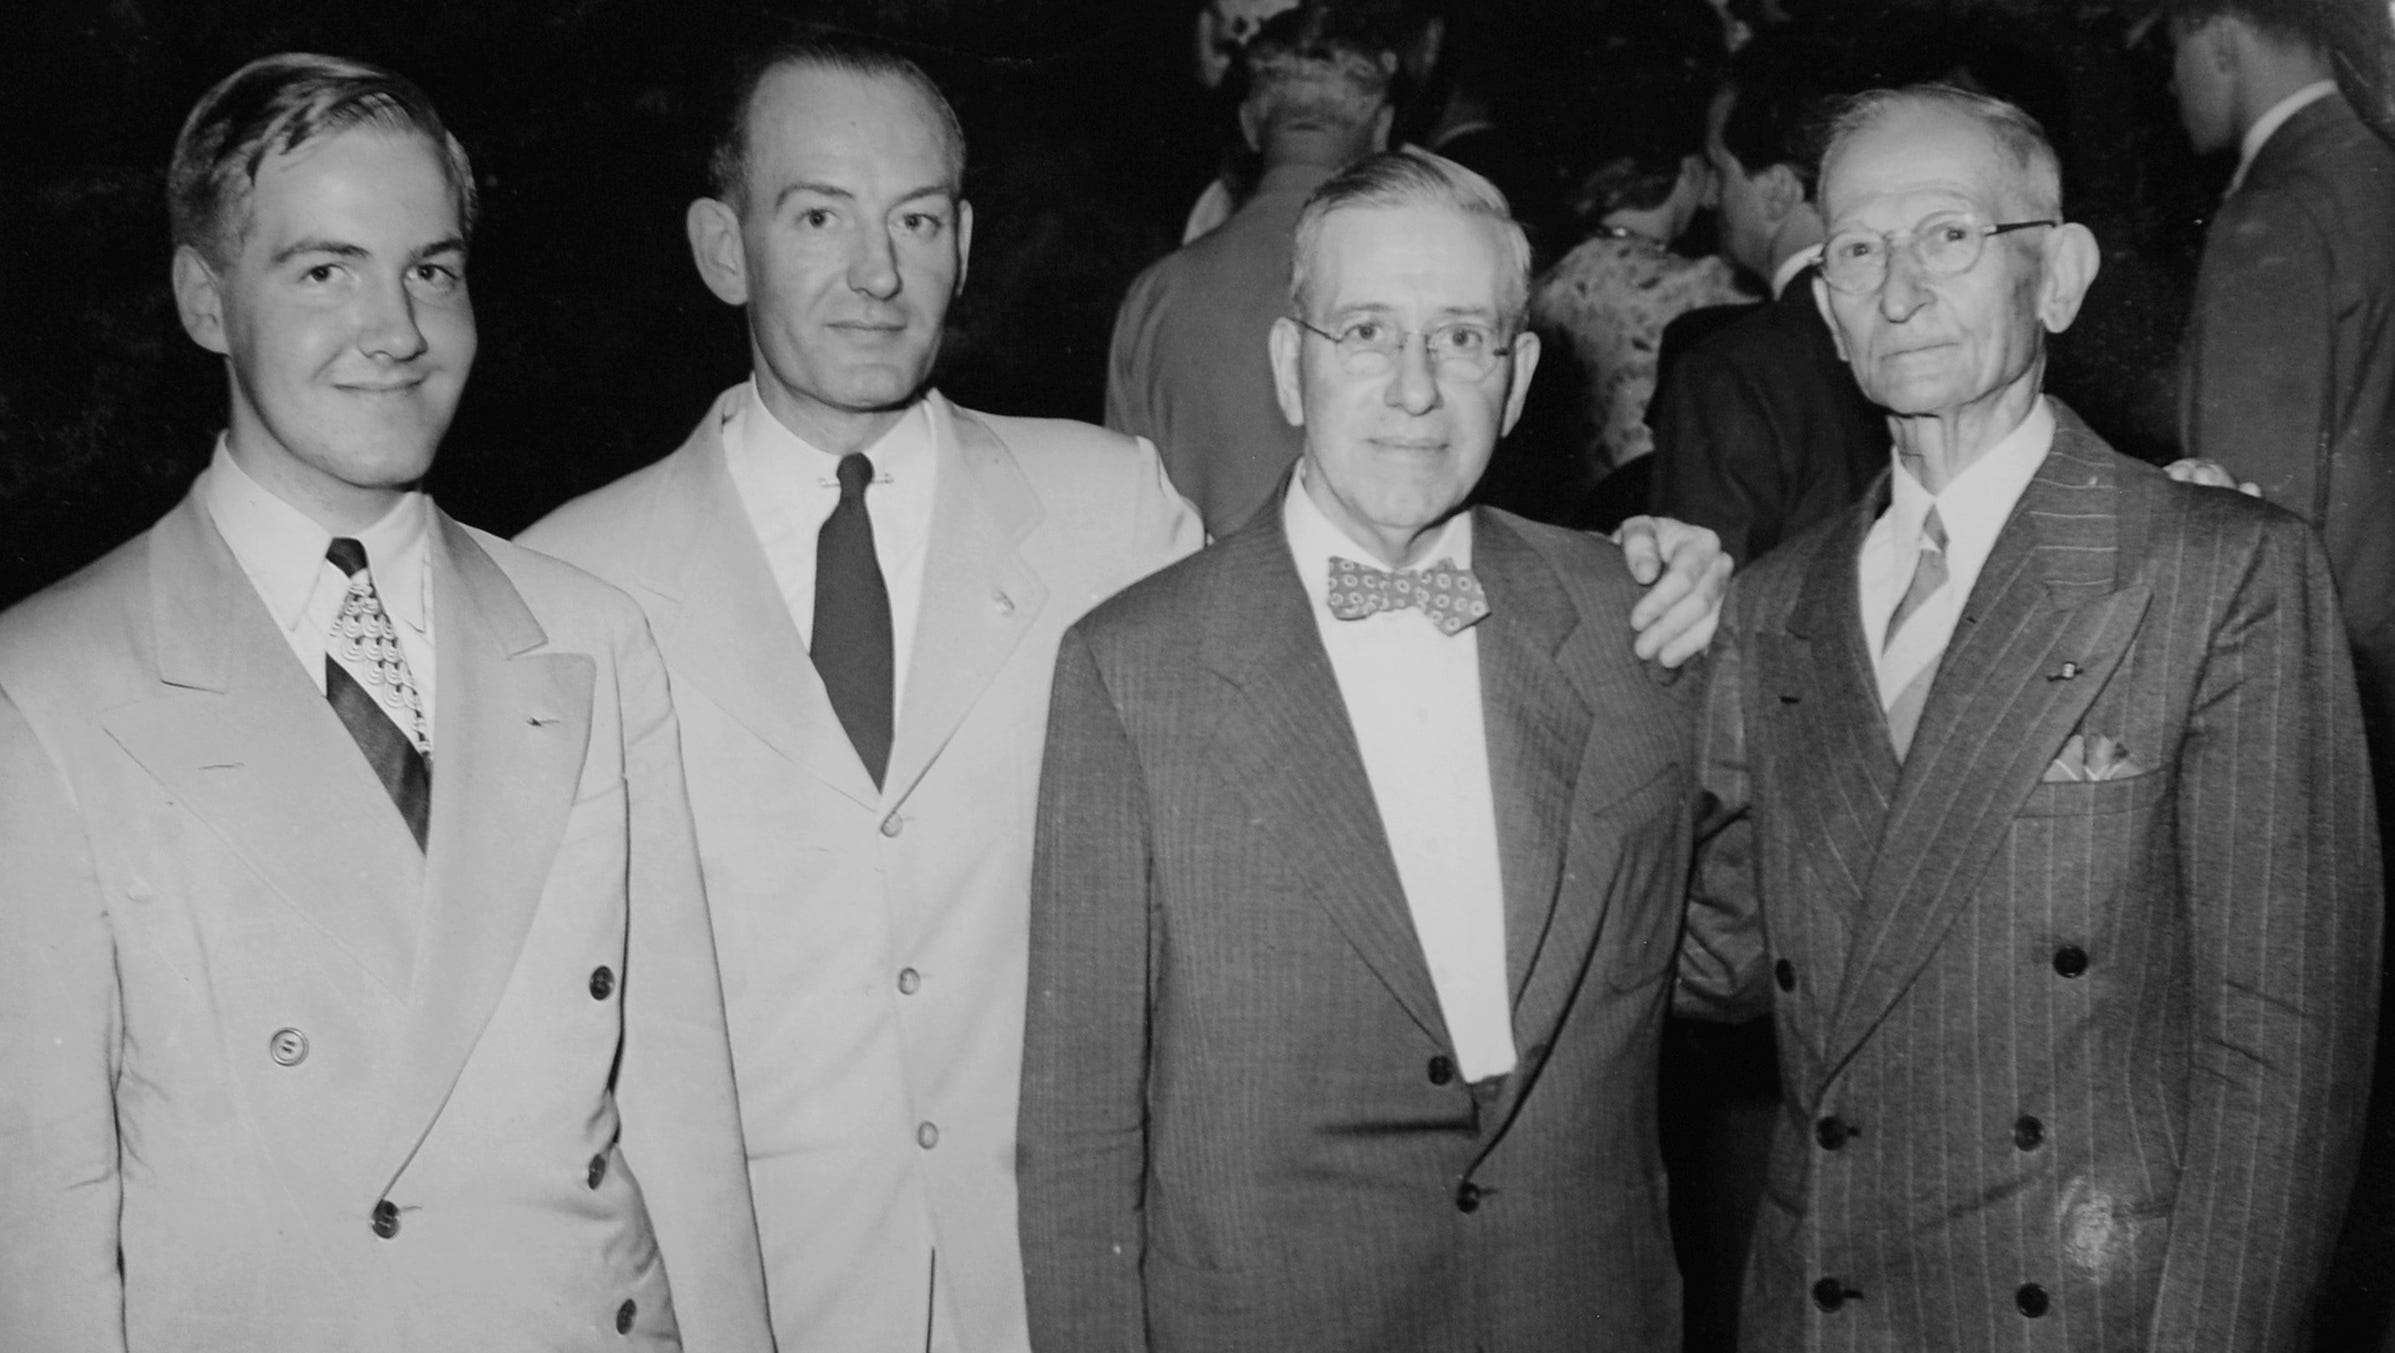 Three generations of the Scripps family attend WWJ's 25th birthday party in 1945:  From left,  William E. Scripps II;  Willliam J. Scripps, general manager of WWJ; and his father Detroit News Publisher William E. Scripps.  At right is Tom Clark, an early radio experimenter who was a key adviser in the creation of the WWJ.